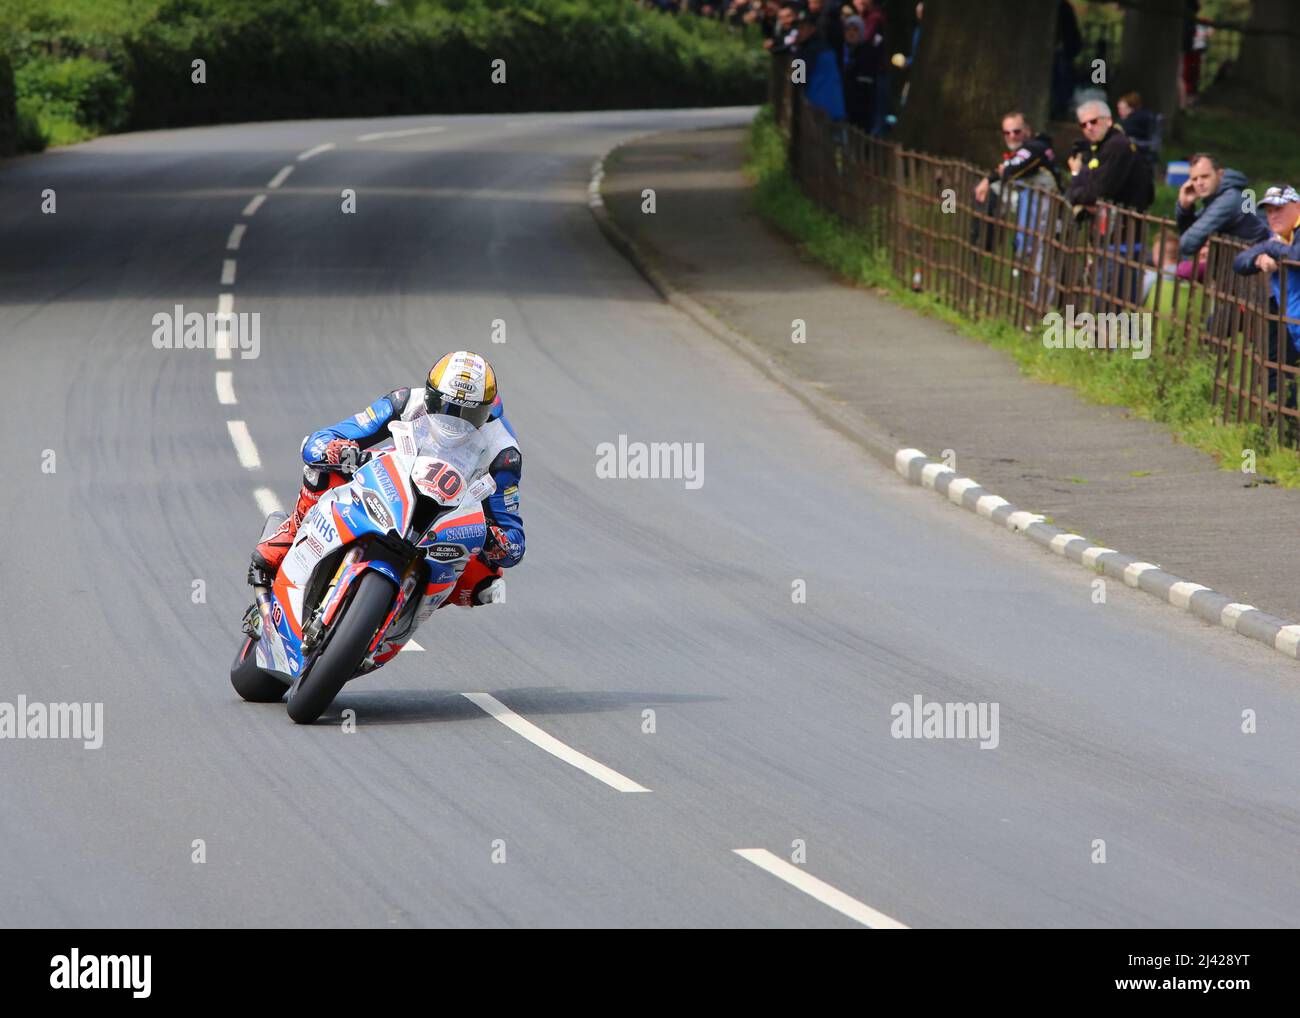 Peter Hickman, 'Hicky' at the 2019 Isle of Man TT motorcycle races riding the Smiths Racing BMW S1000RR superbike. Stock Photo